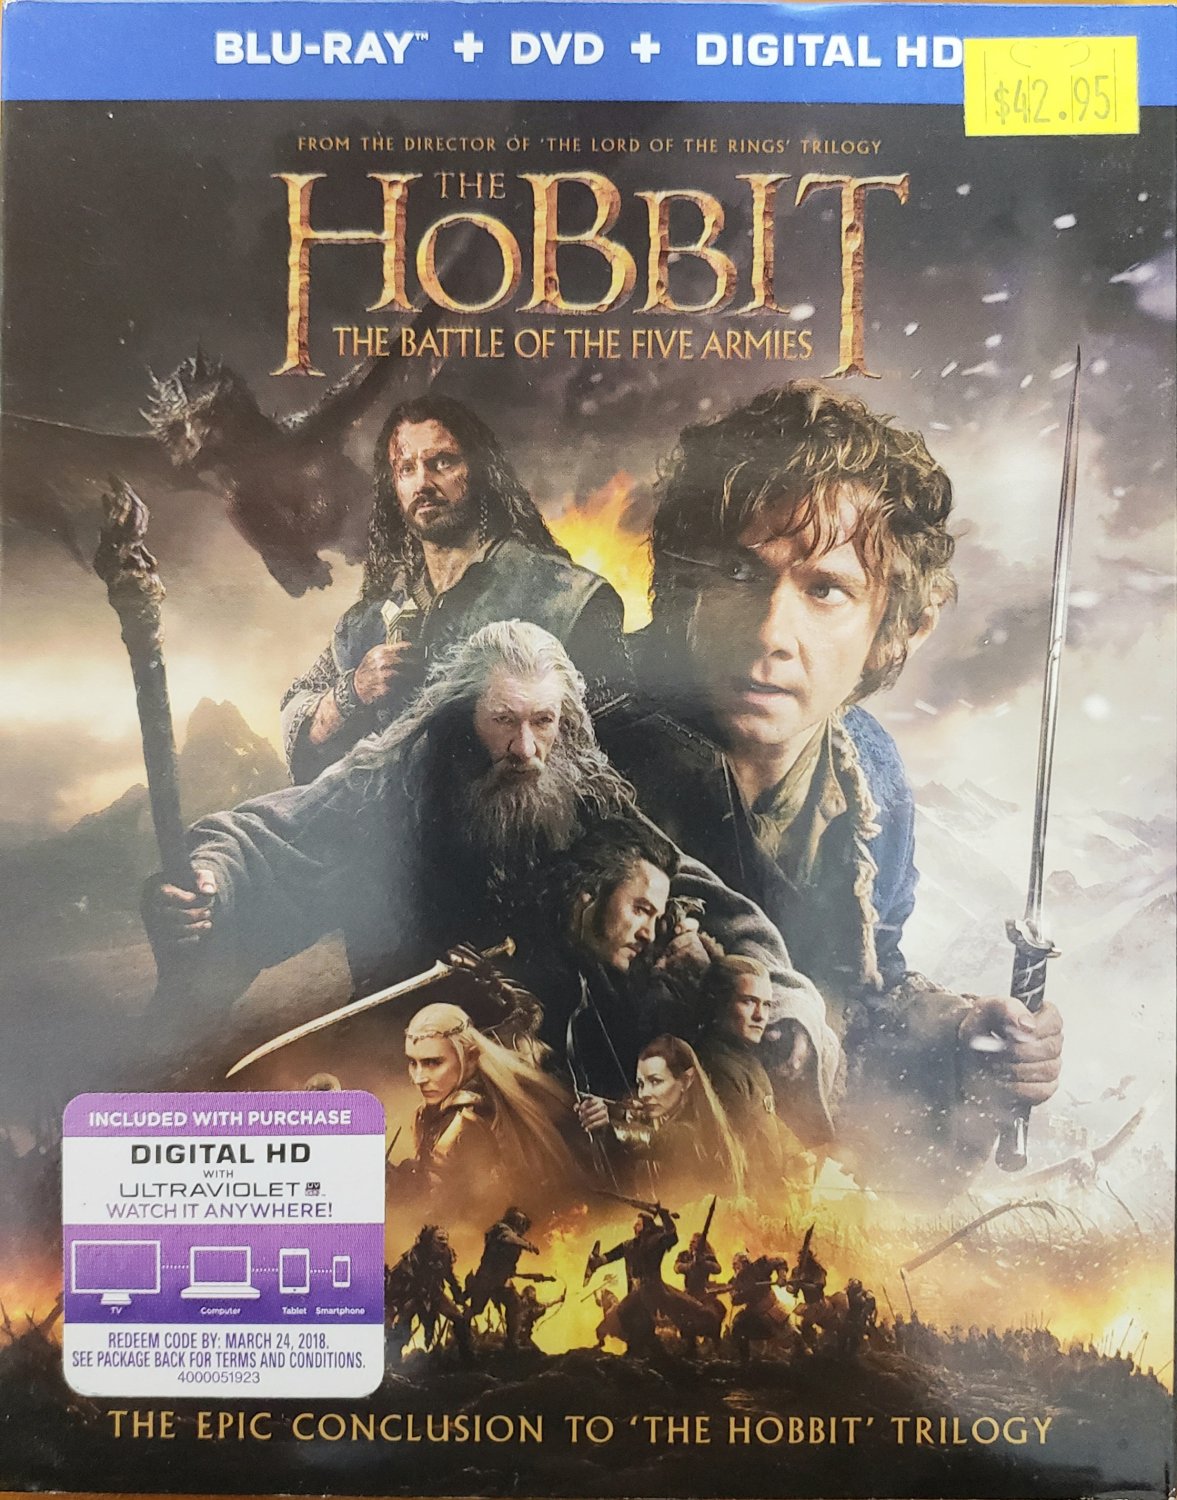 THE HOBBIT THE BATTLE OF THE FIVE ARMIES 2014 BLU-RAY+DVD